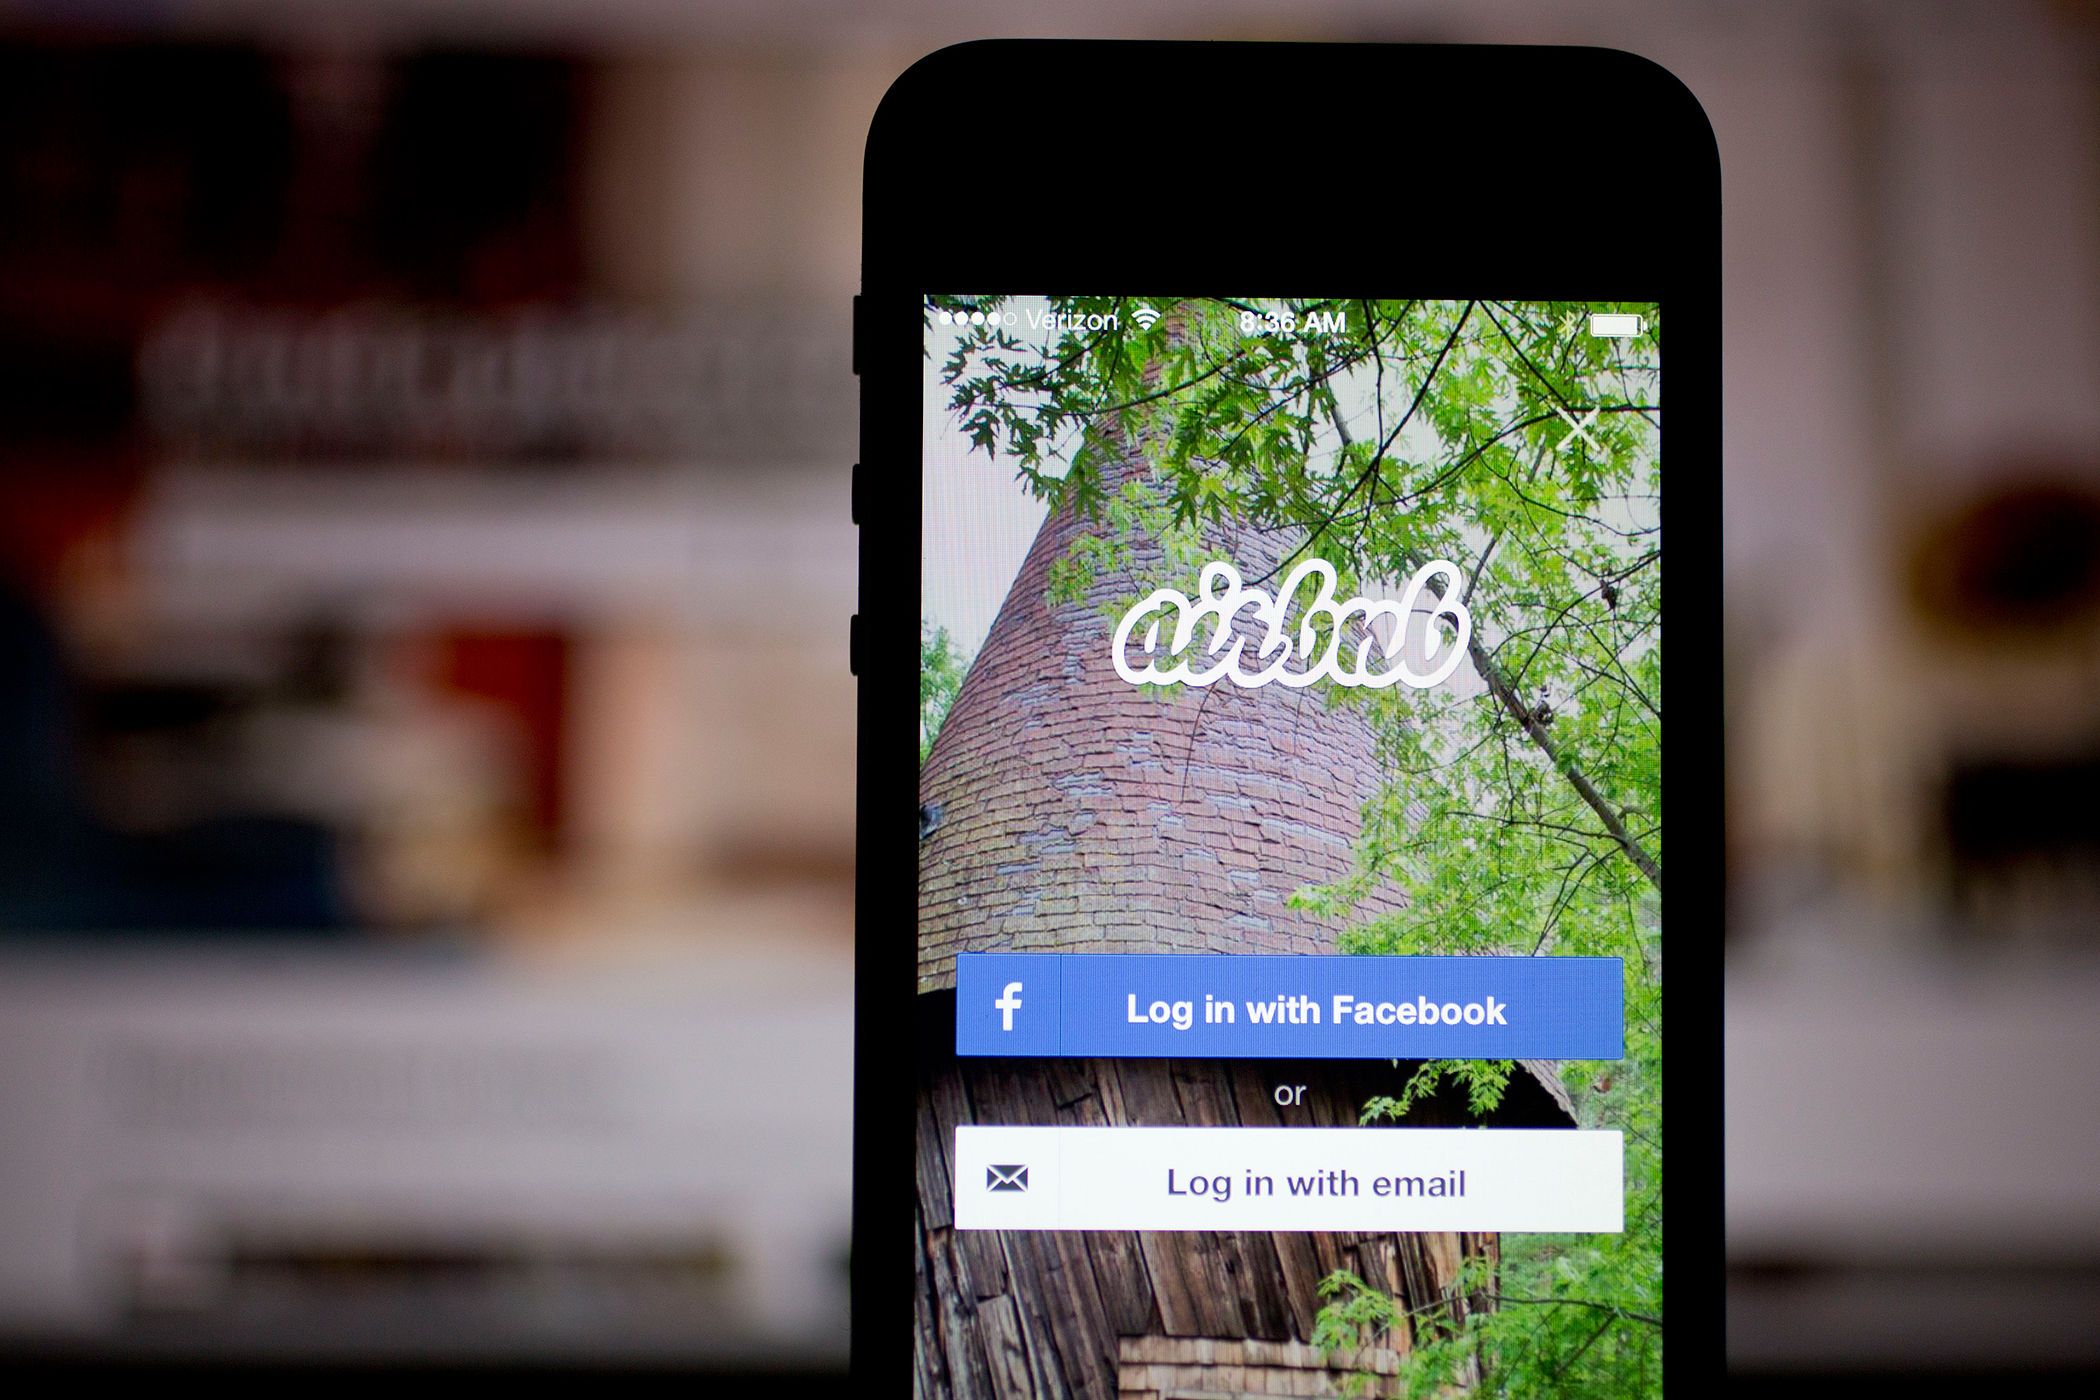 Airbnb Hosts Are Racist, Study Finds